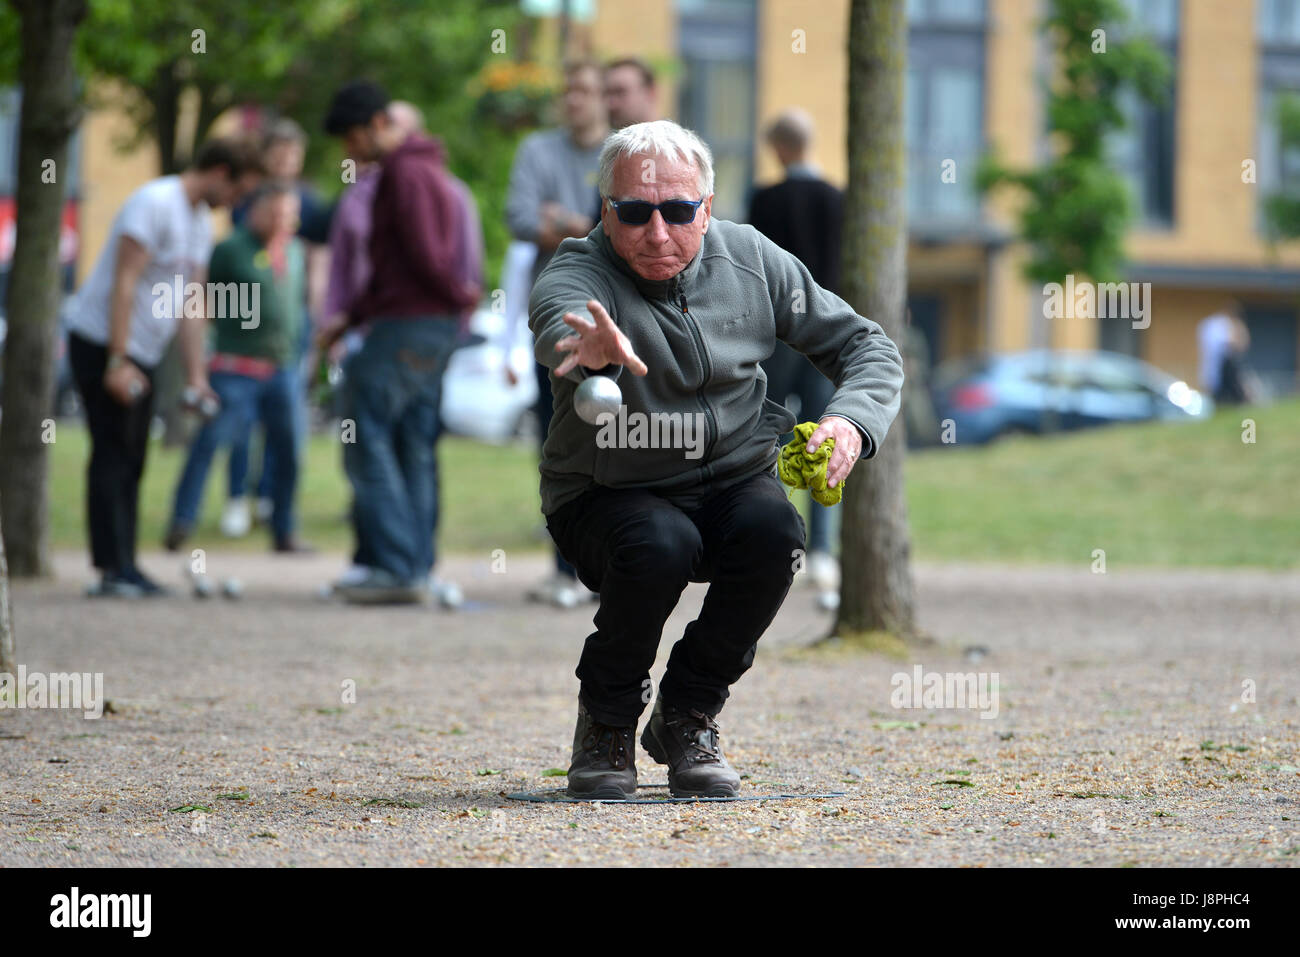 Boules in London. People playing boules in Vauxhall Park, London. Stock Photo